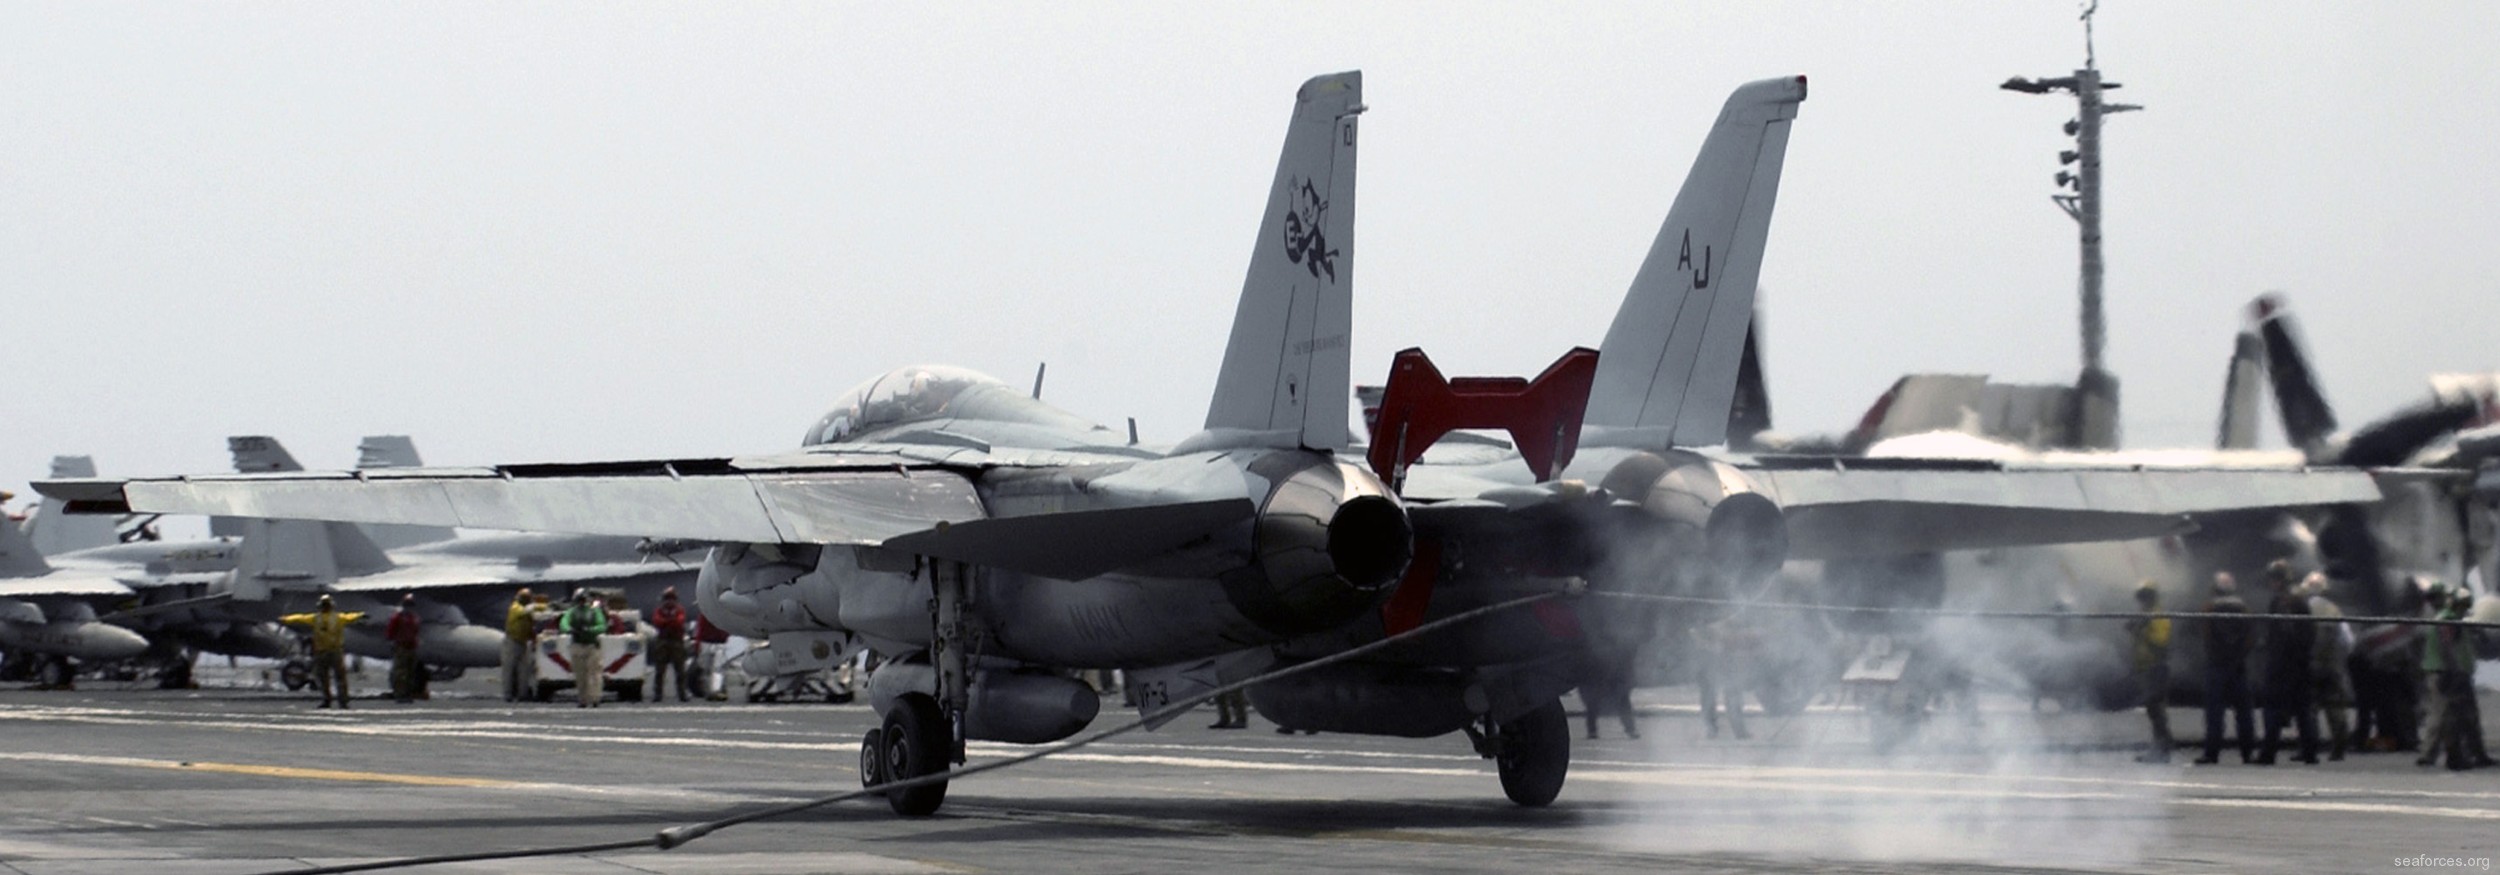 vf-31 tomcatters fighter squadron navy f-14d tomcat carrier air wing cvw-8 uss theodore roosevelt cvn-71 213